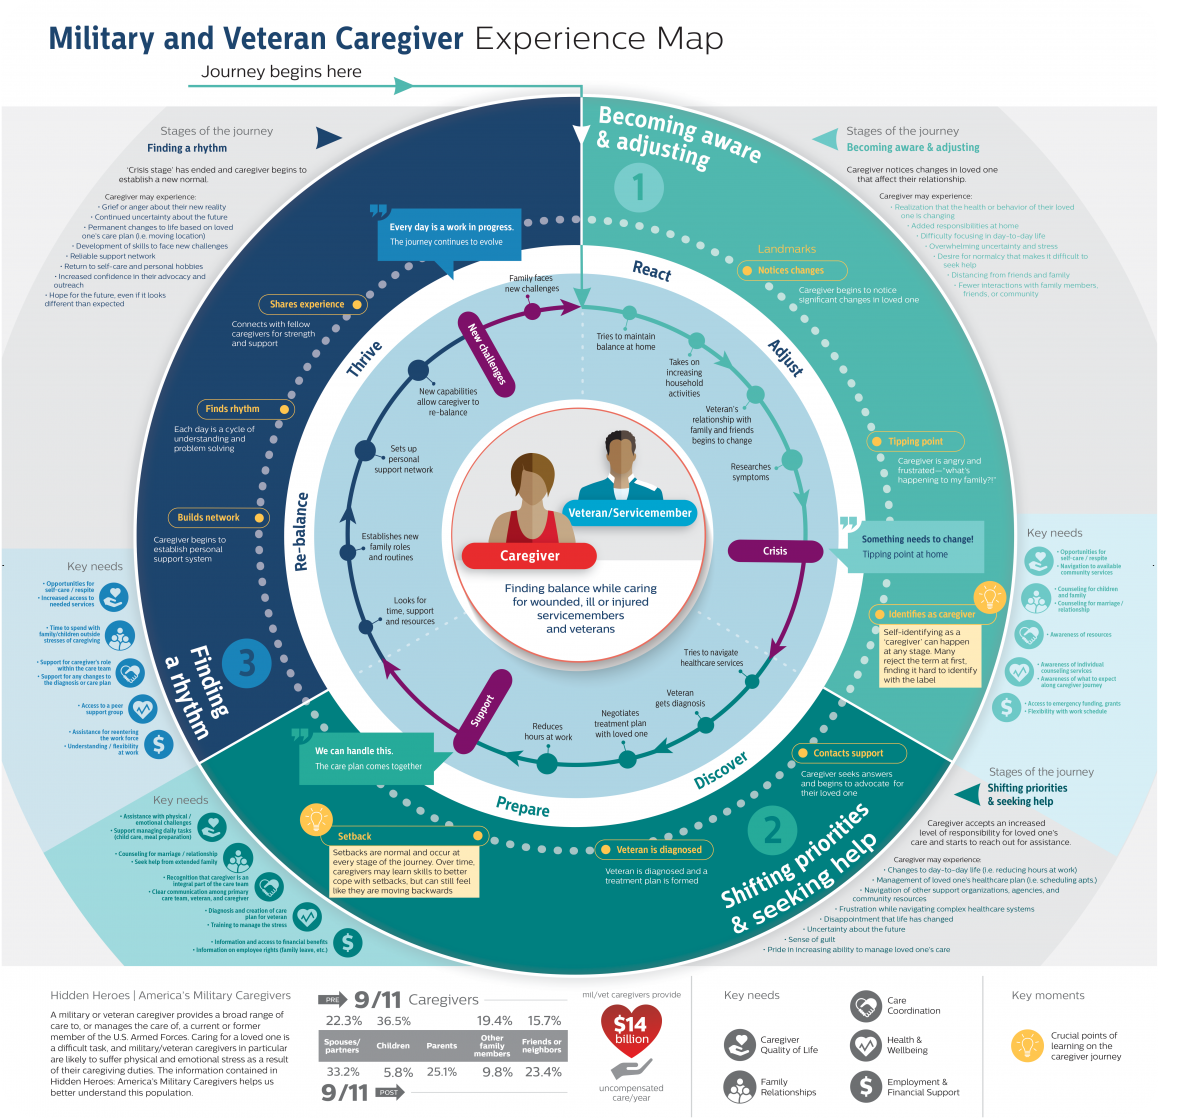 Military and Veteran Caregiver Journey map